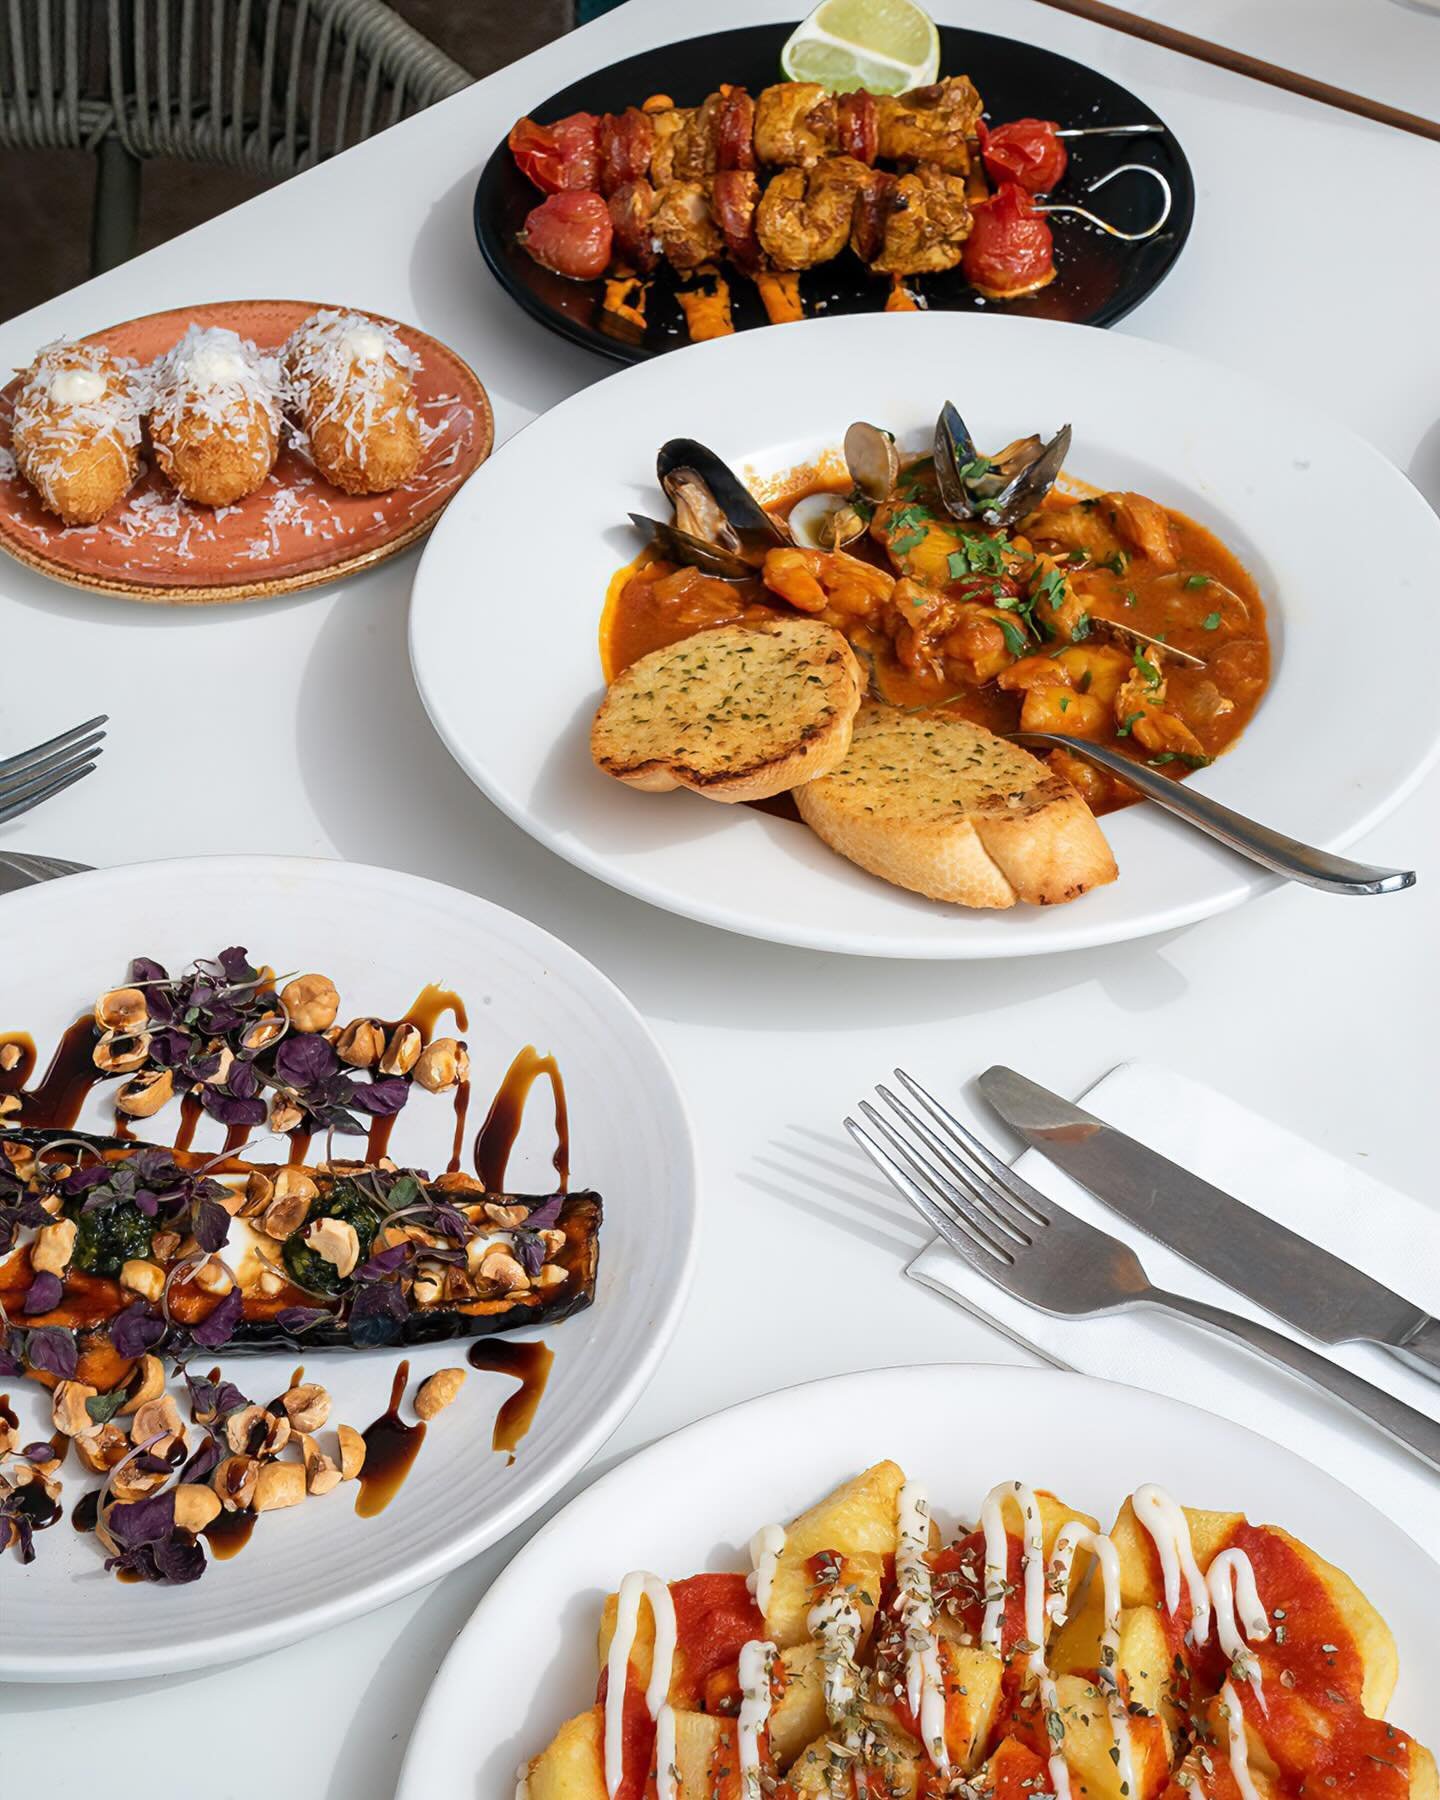 Hungry? 🍽️Our set lunch menu has your back. Warning‼️: may cause severe cases of tapas addiction. You've been warned!🤭
.
.
.
.
#tapaslover #setlunch #lunchtime #riversideview #southbanklondon #lagambalondon